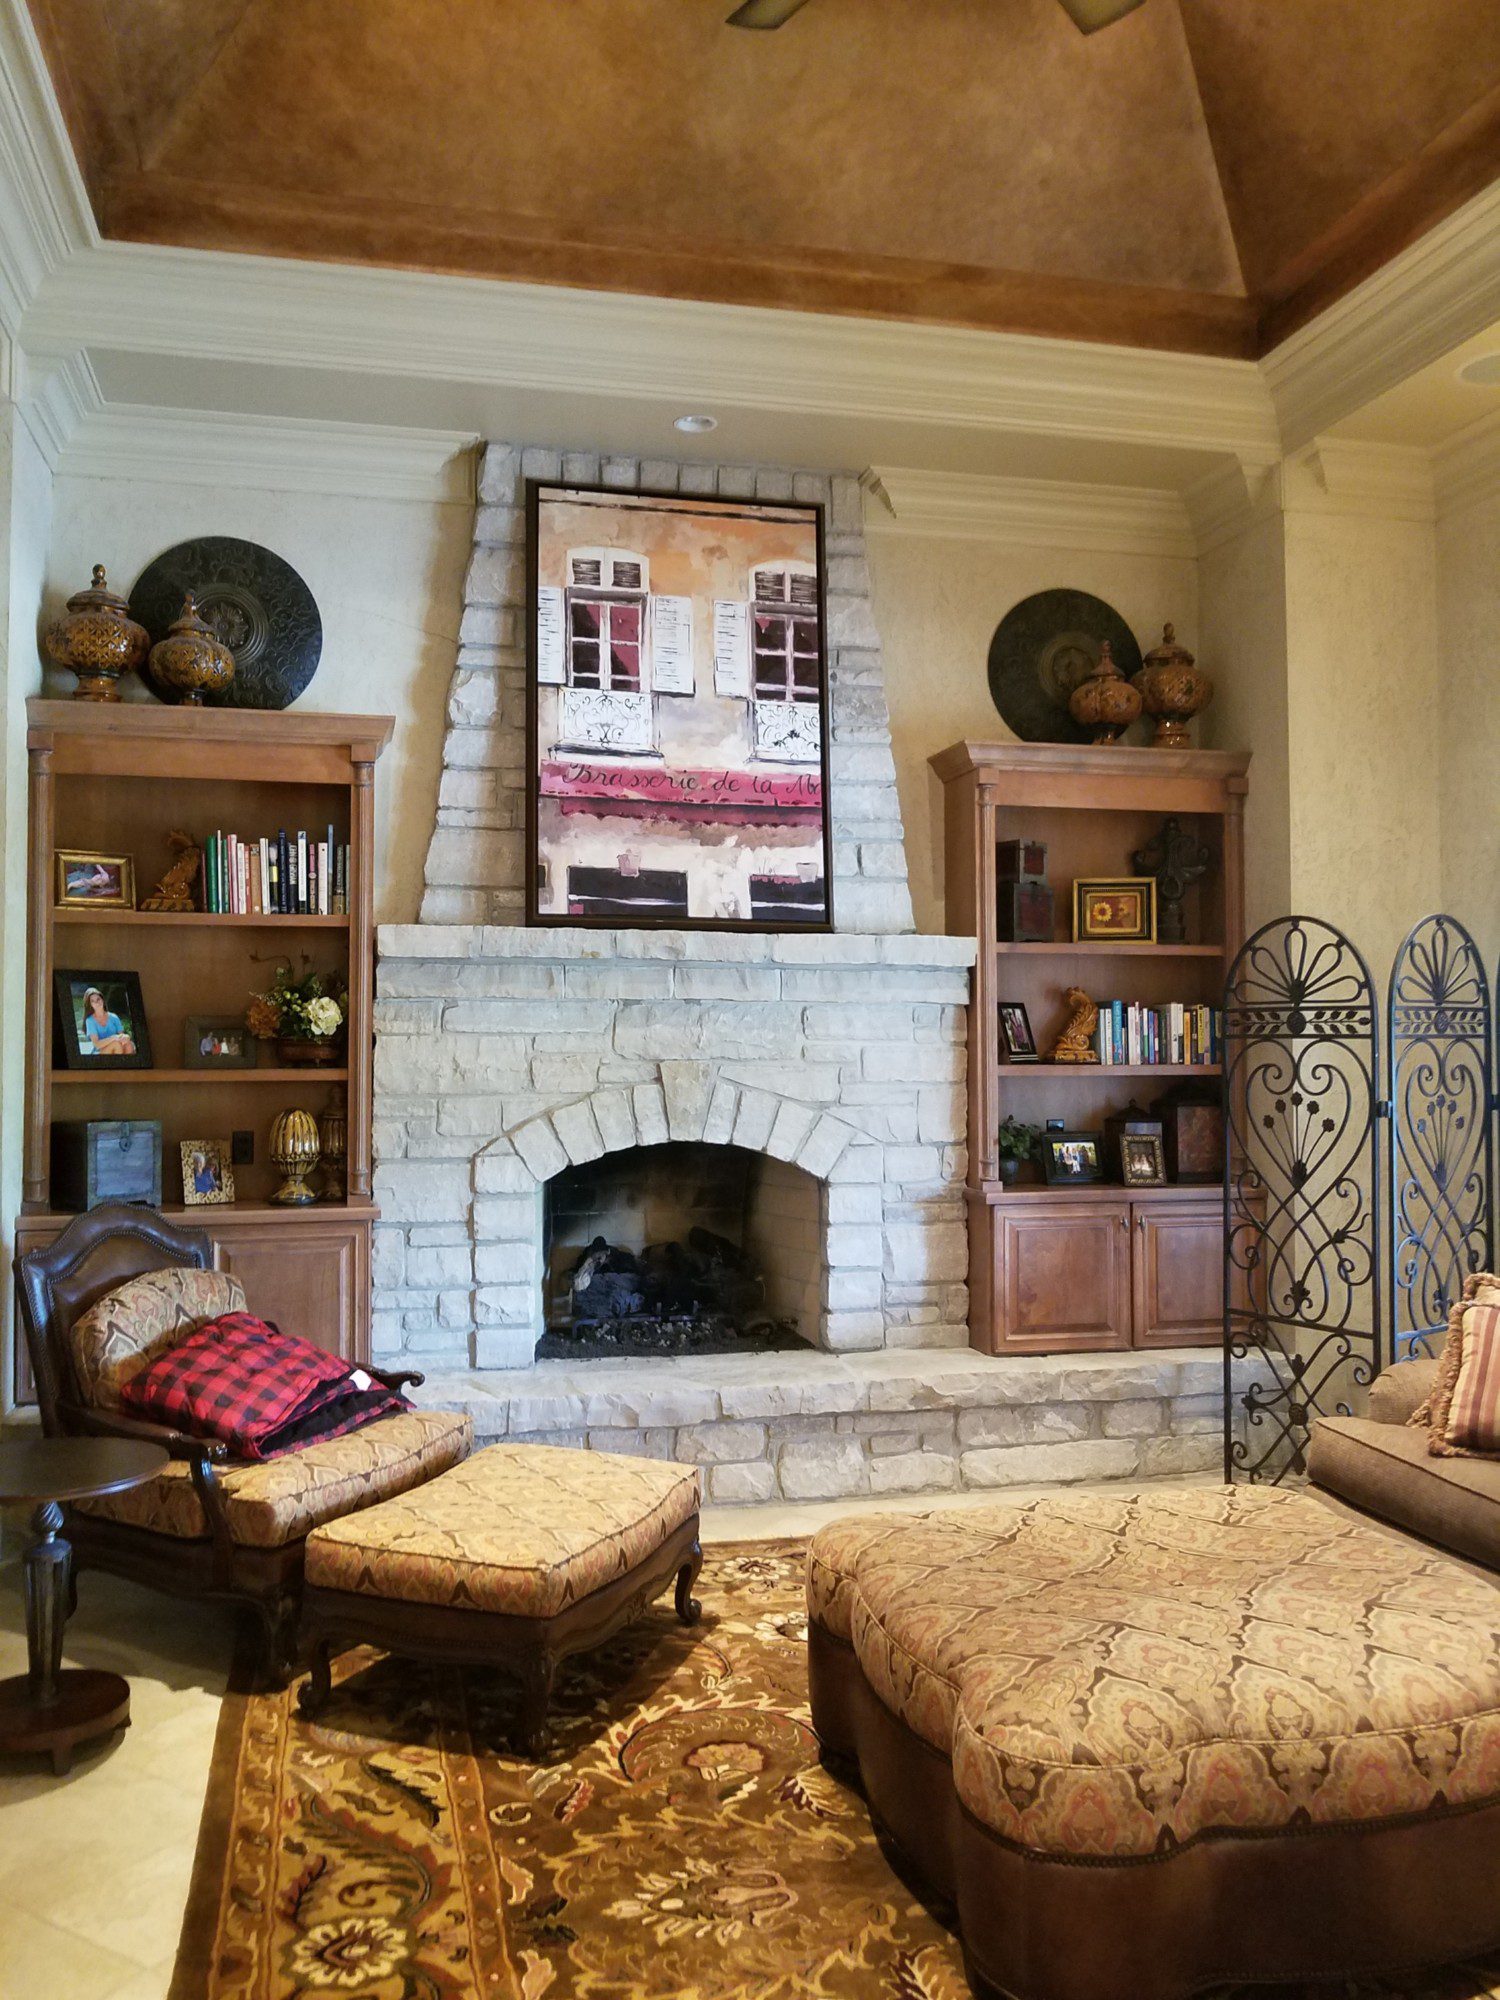 large stone fireplace in living room with tuscan decor